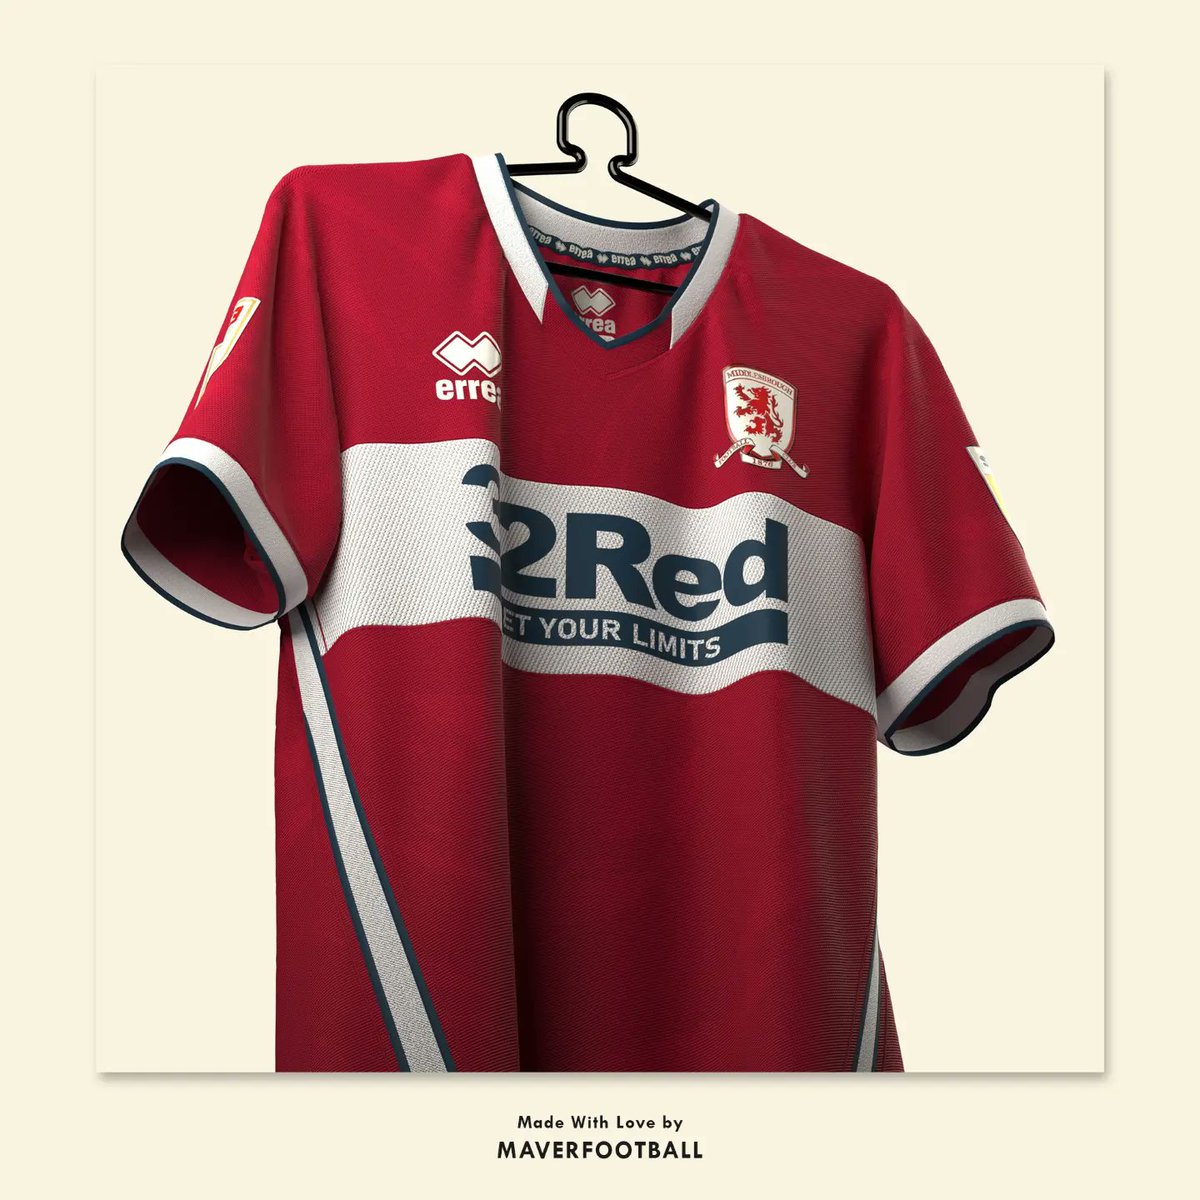 Erreà has signed a sponsorship agreement with @Boro. The Italian brand, which will succeed @hummelsport, has already produced the uniforms between 90s and early 2000s. What about these concepts?
#boro #Middlesbrough #middlesbroughfc #championship #woveninhistory #erreà #clo3d